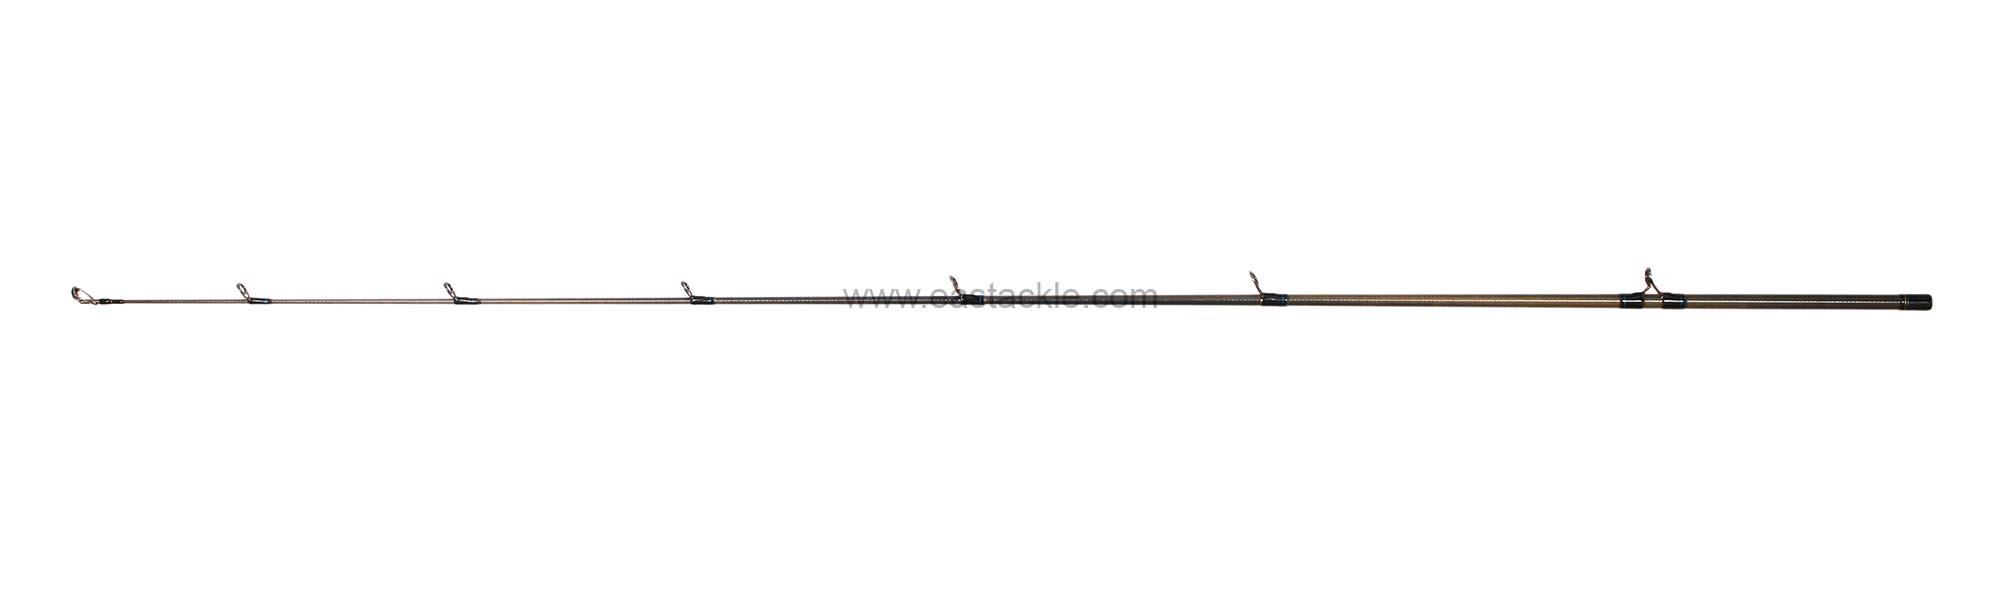 Daiwa - Harrier - 602MB-SD - Bait Casting Rod - Tip Section (Side View) | Eastackle